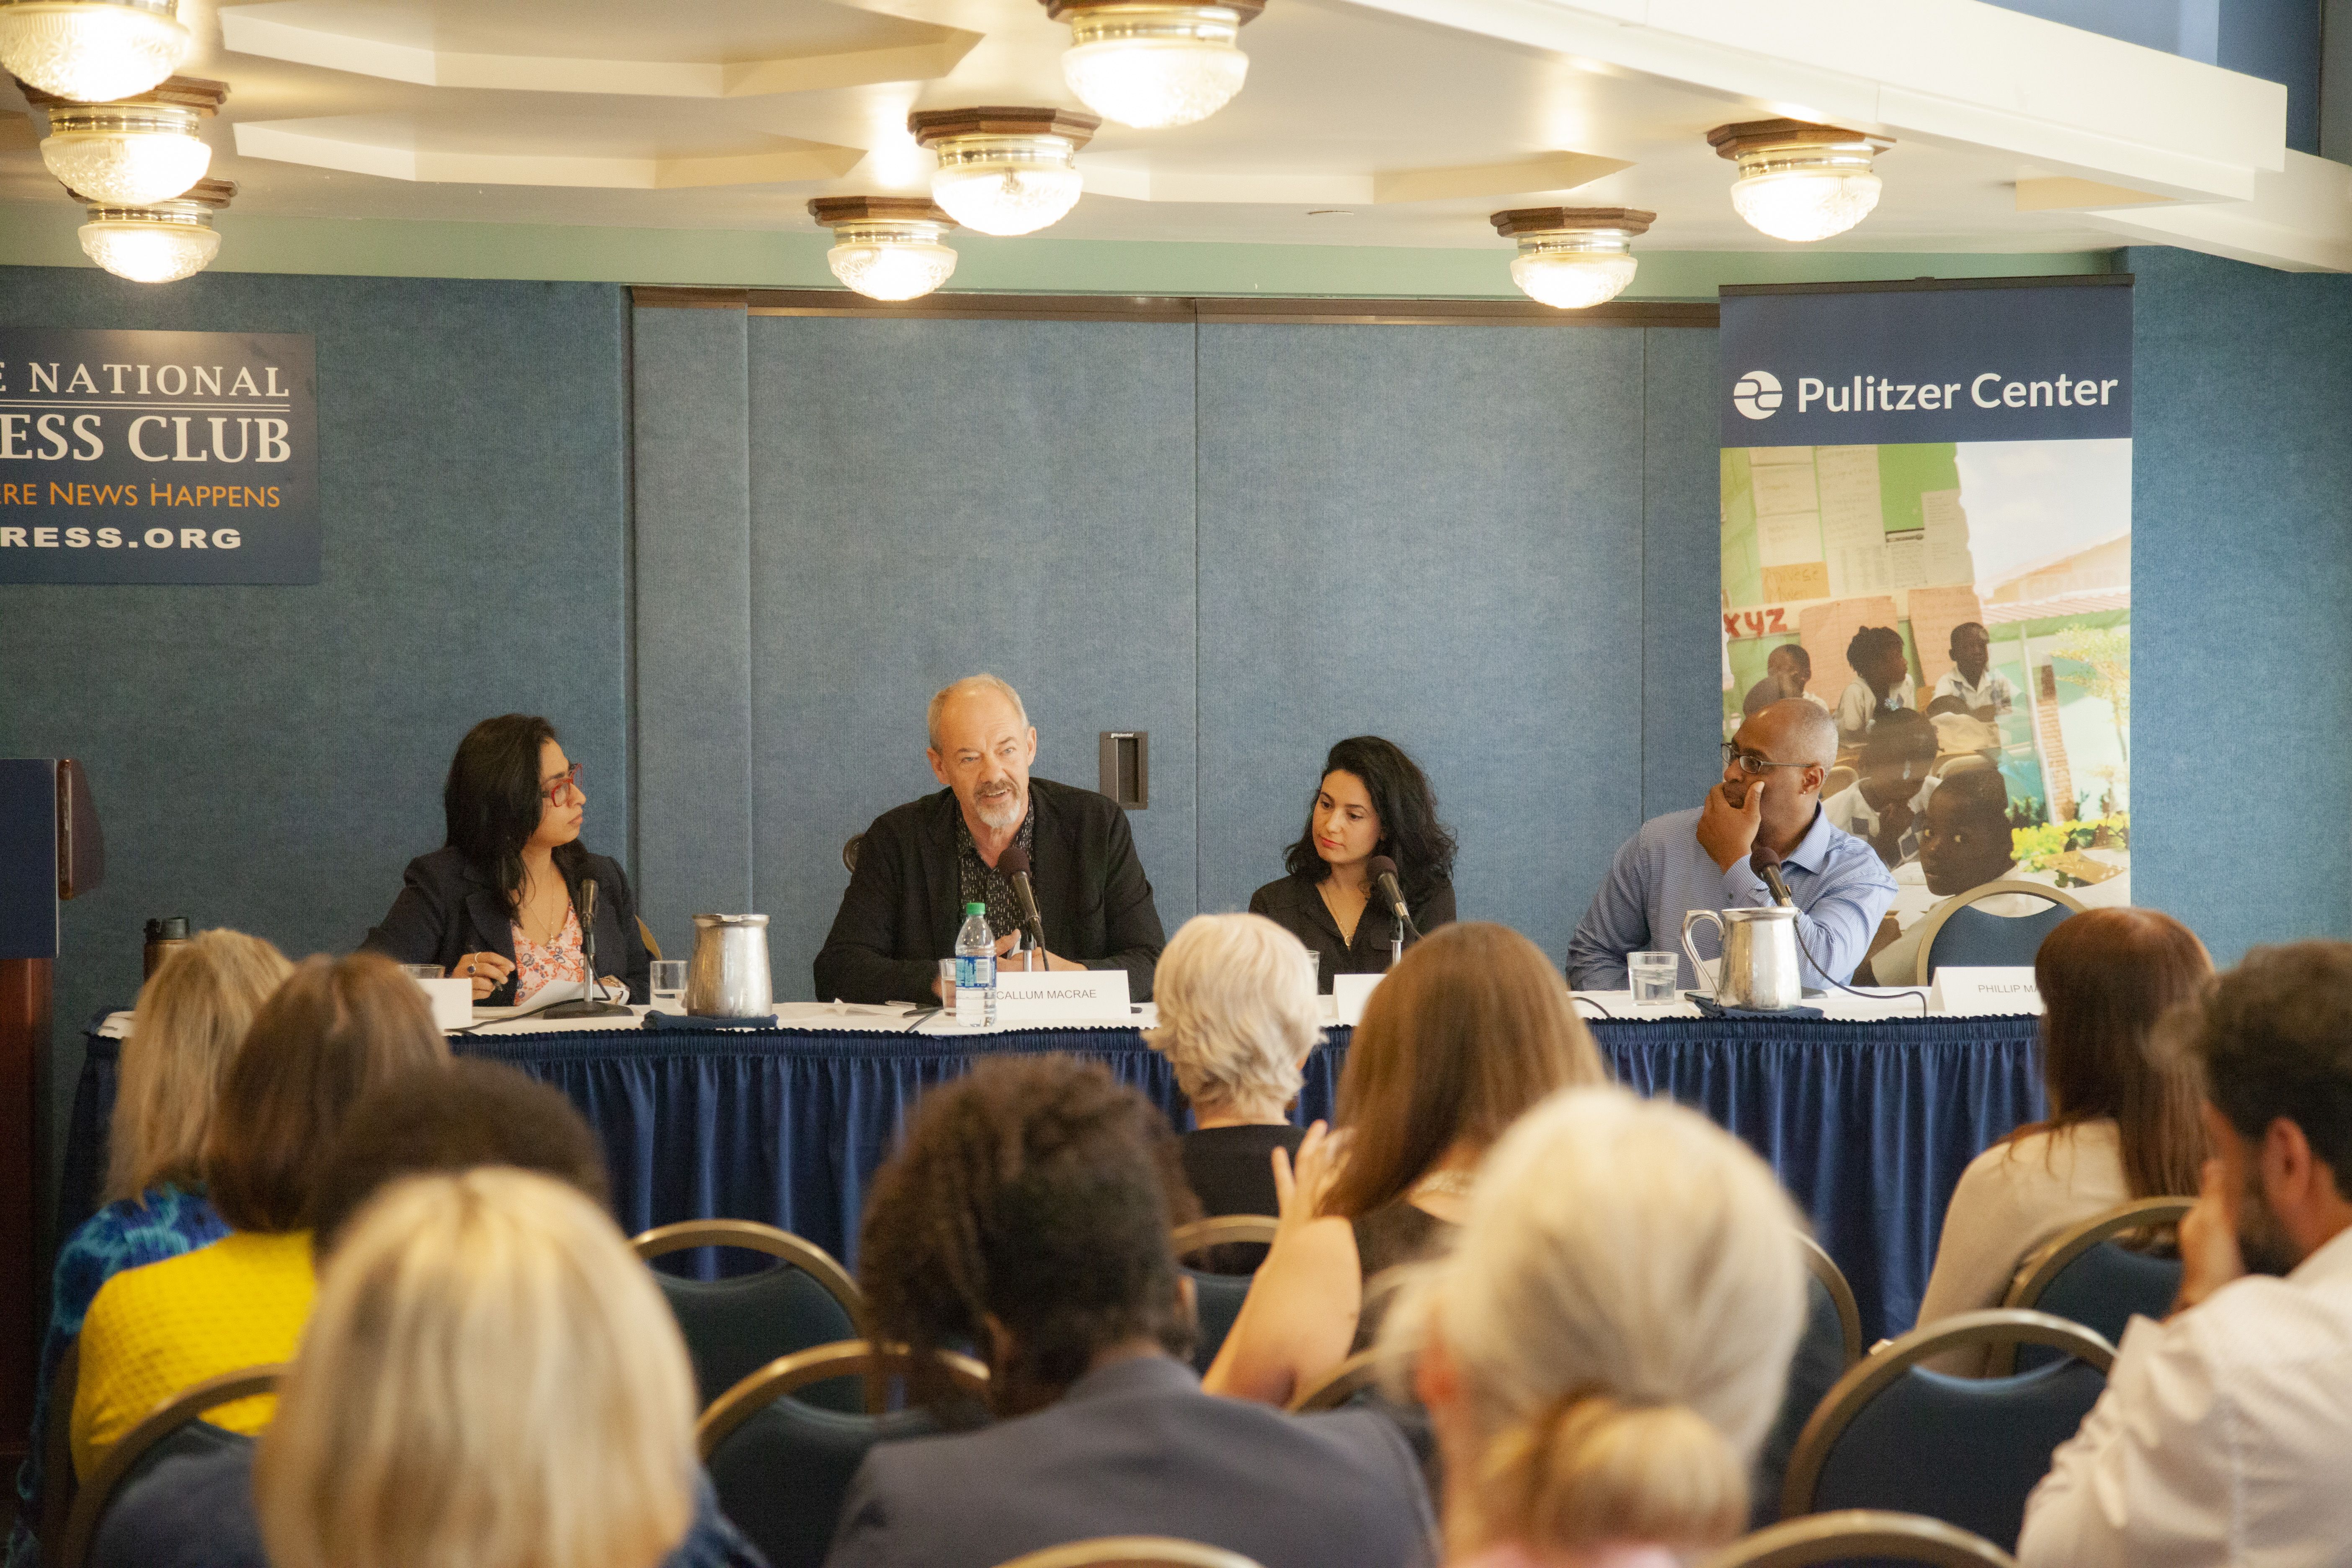 Amber Khan (far left) speaking with Pulitzer Center grantees (from left to right) Callum Macrae, Iris Zaki, and Phillip Martin. Image by Jin Ding. Washington, D.C., 2019.